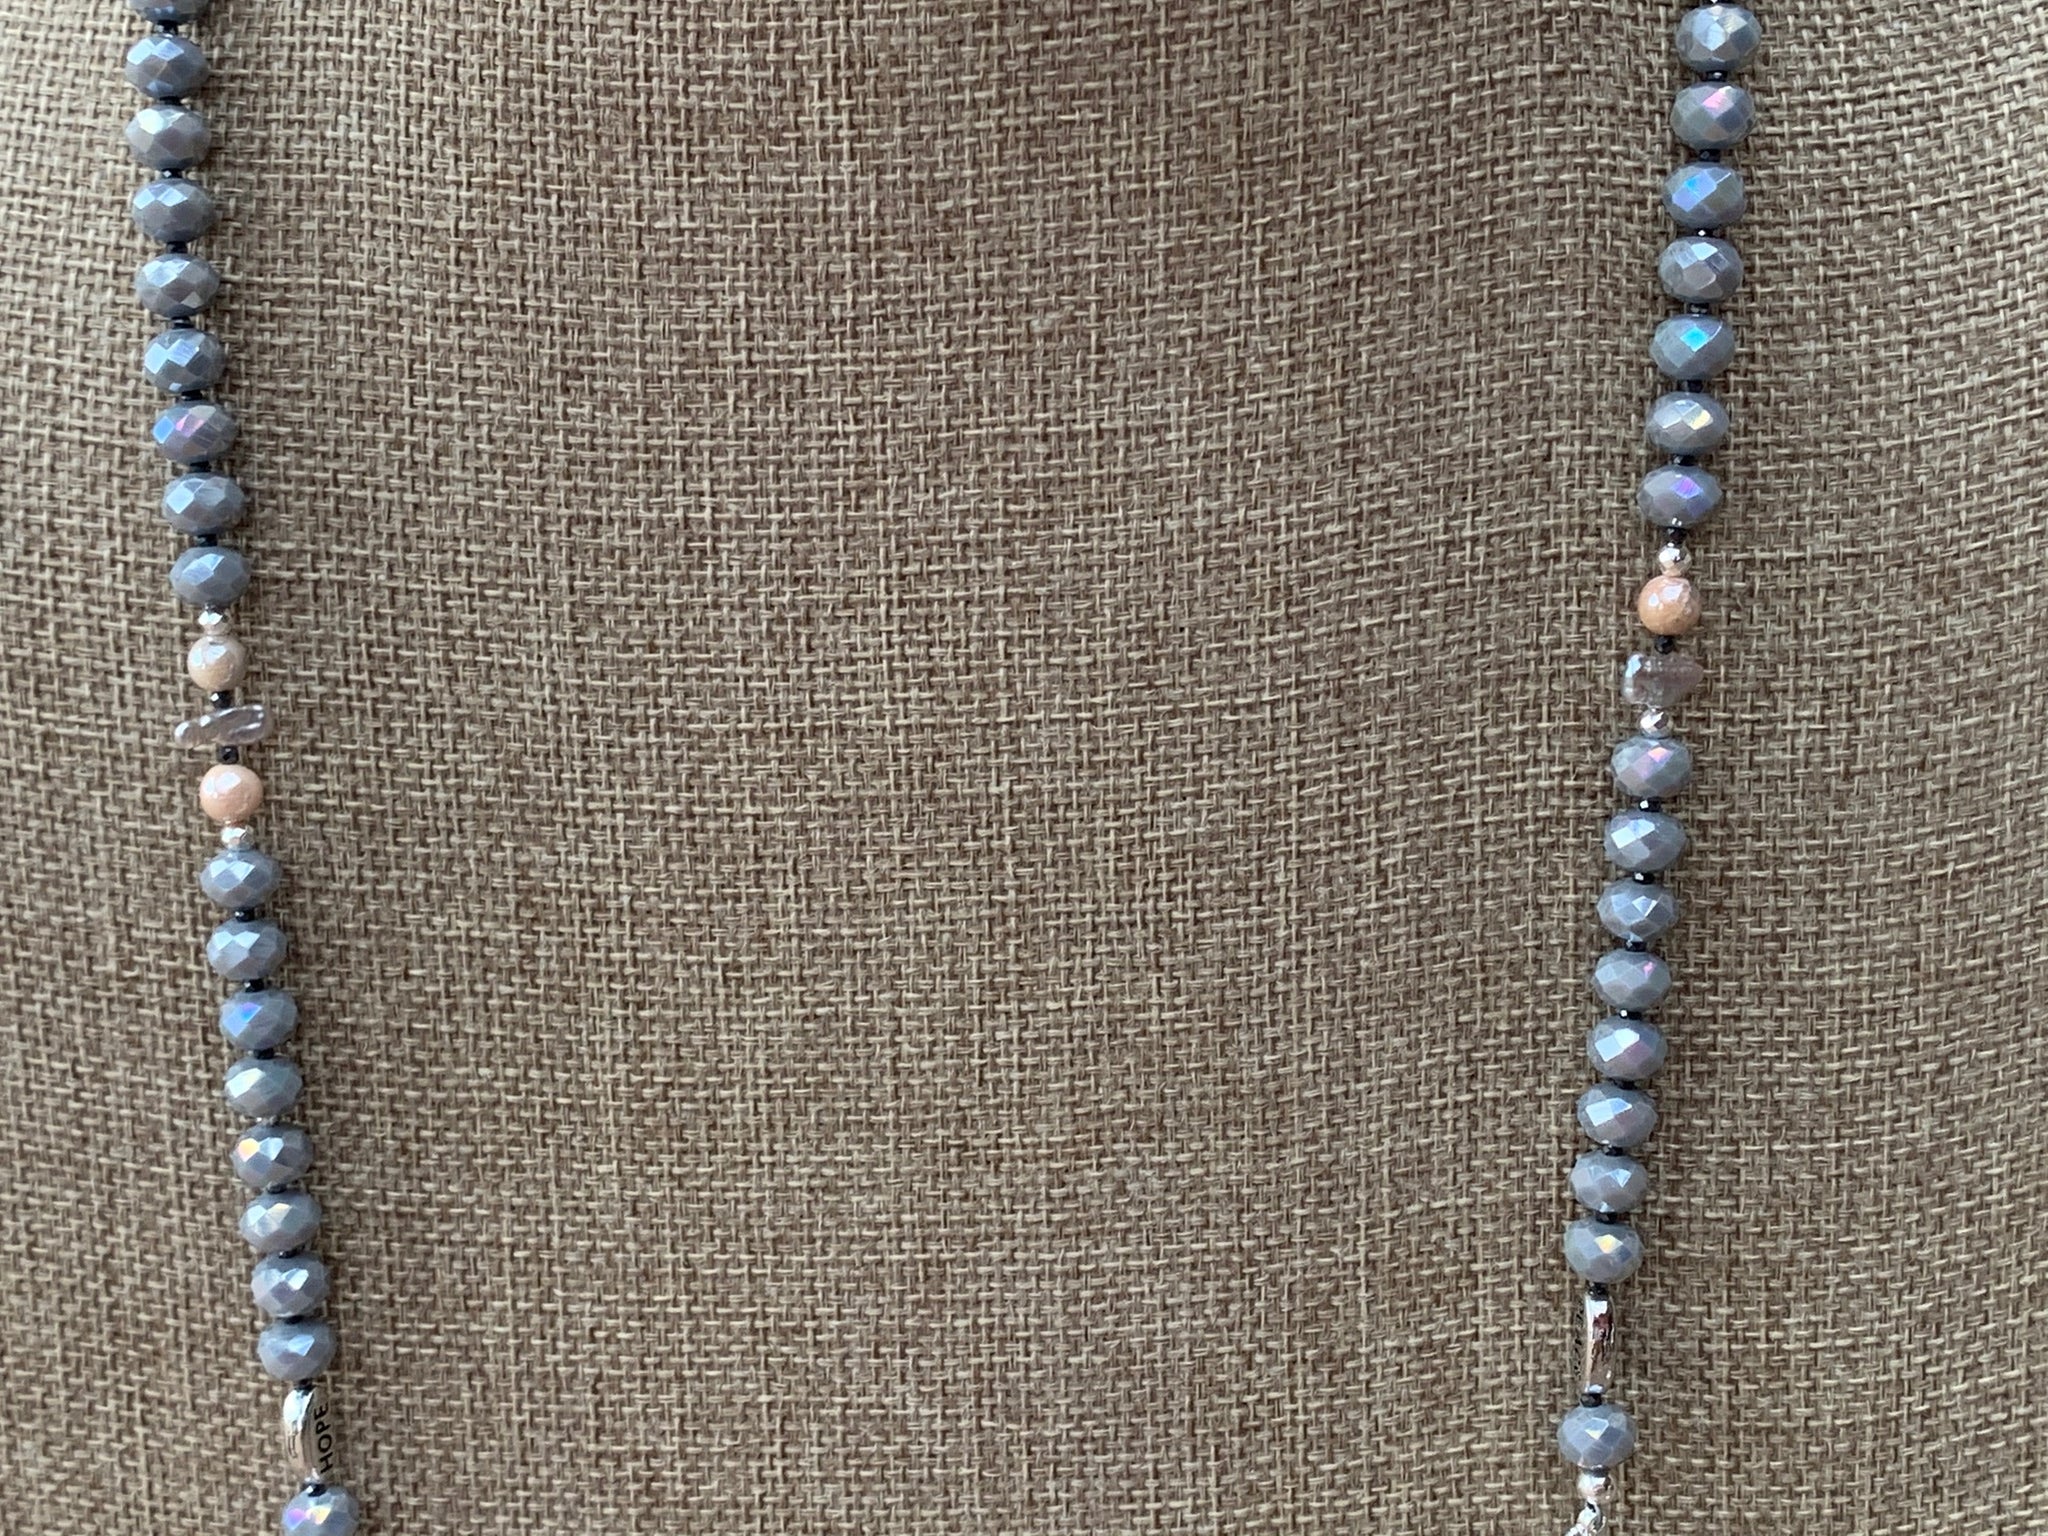 Mother of Pearl Lariat